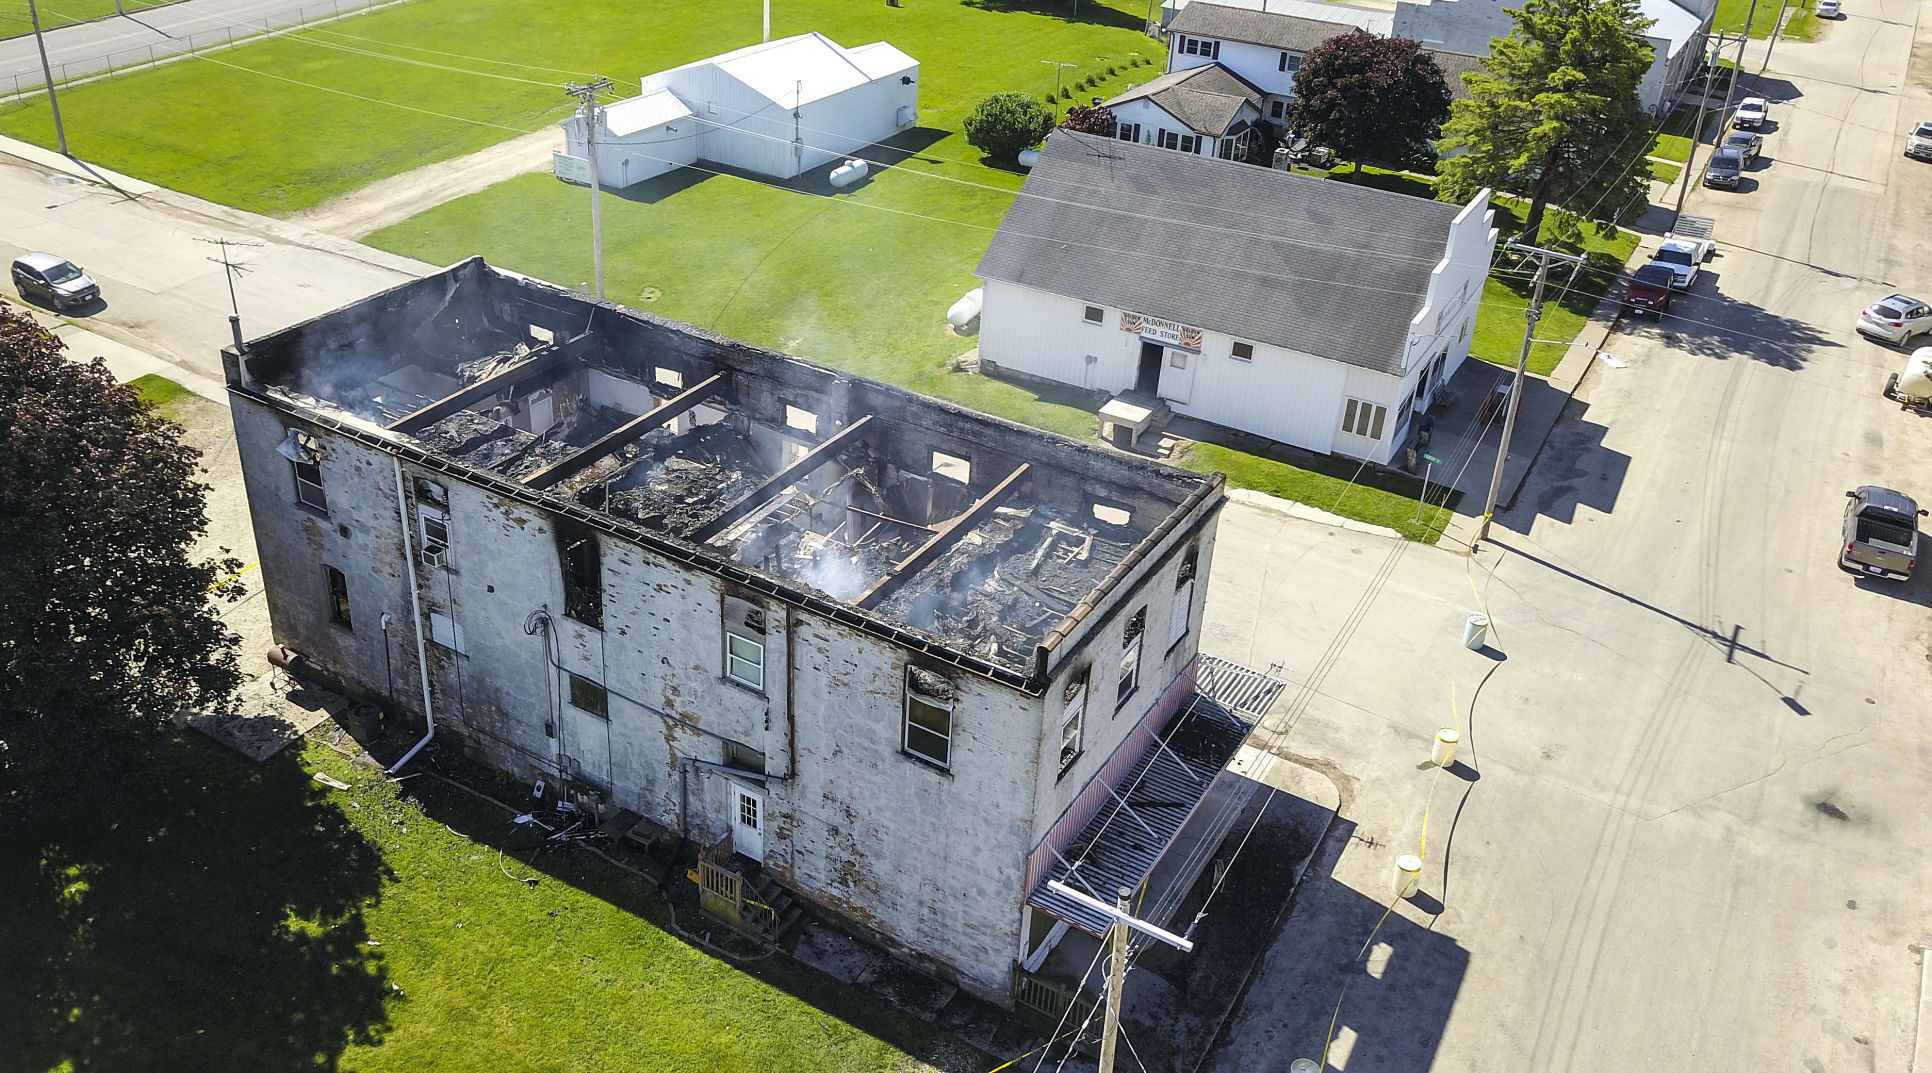 Fire still smolders after the building that housed the Painted Horse Saloon and second-floor apartments at 268 Jess St. in Bernard, Iowa caught fire in the early morning hours Wednesday, May 26, 2021. PHOTO CREDIT: Dave Kettering